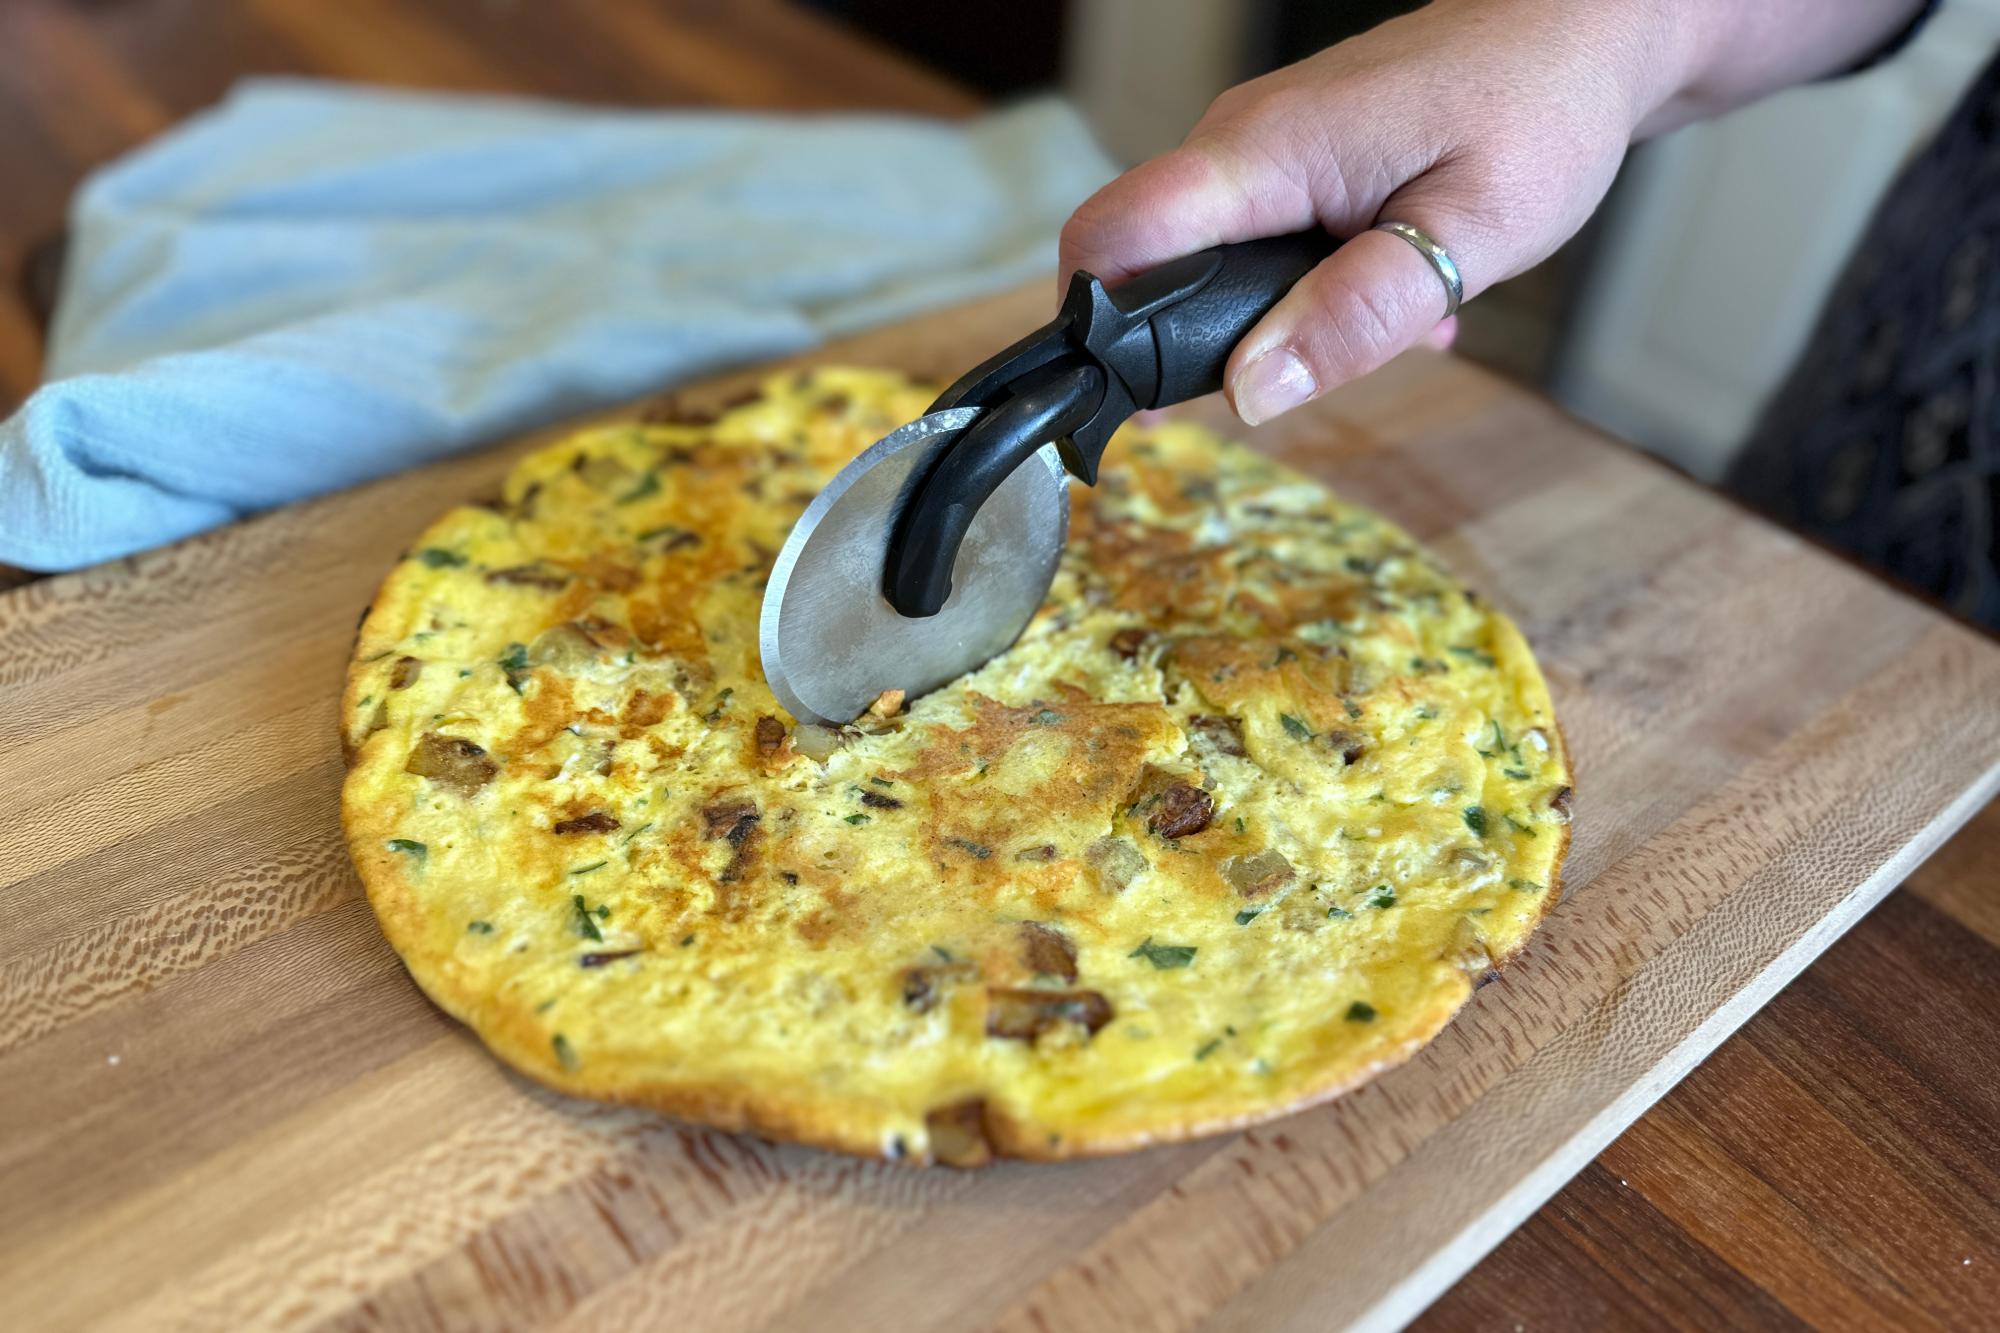 Cutting the frittata with a Pizza Cutter.